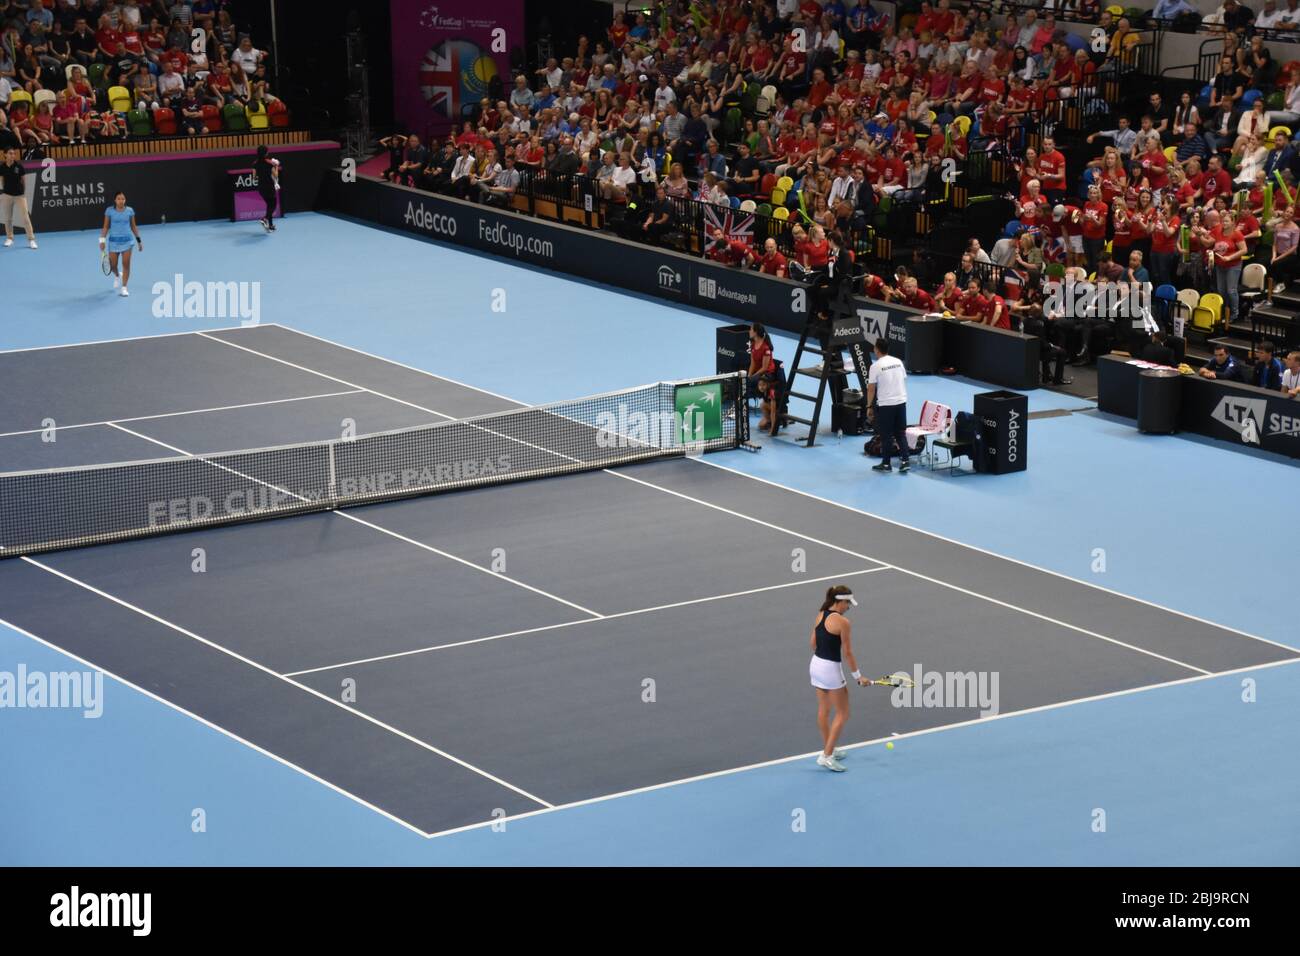 The British female tennis player Johanna Konta playing at the women's tennis  Fed Cup against Kazakhstan on the 20th of April 2019, Copper Box Arena  Stock Photo - Alamy